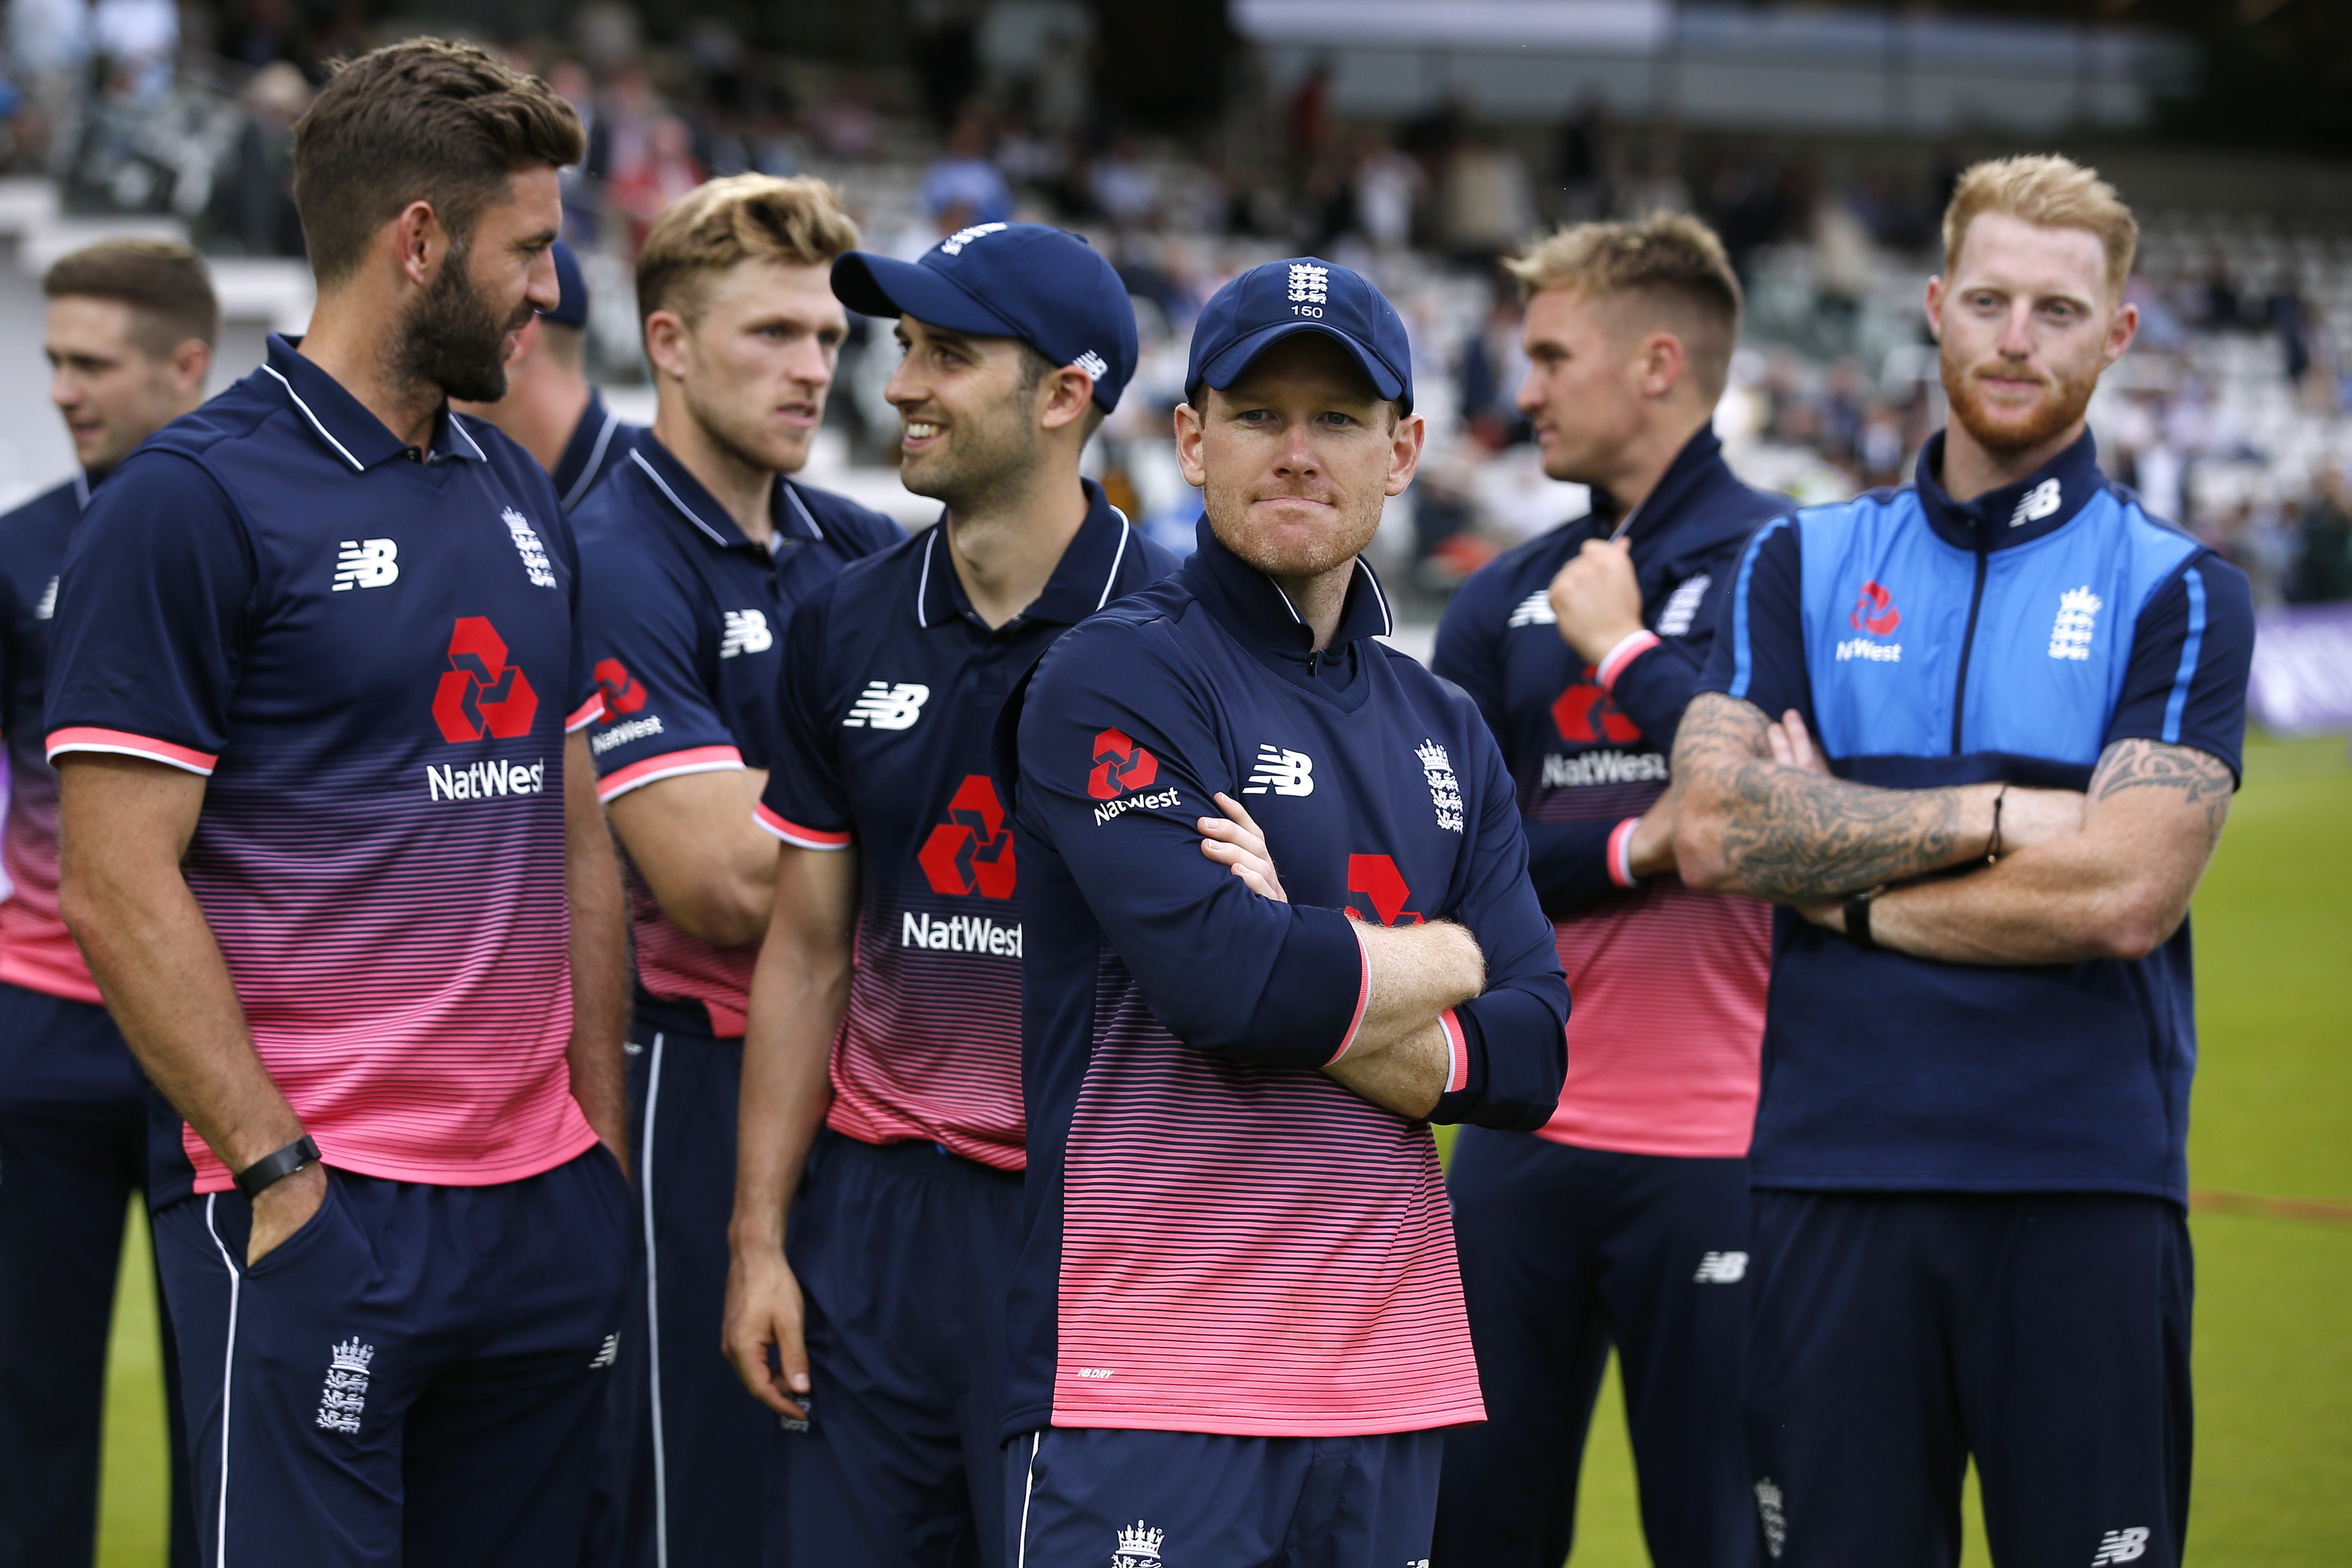 England captain Eoin Morgan before the presentation after winning the ODI series with South Africa. Photo: Reuters